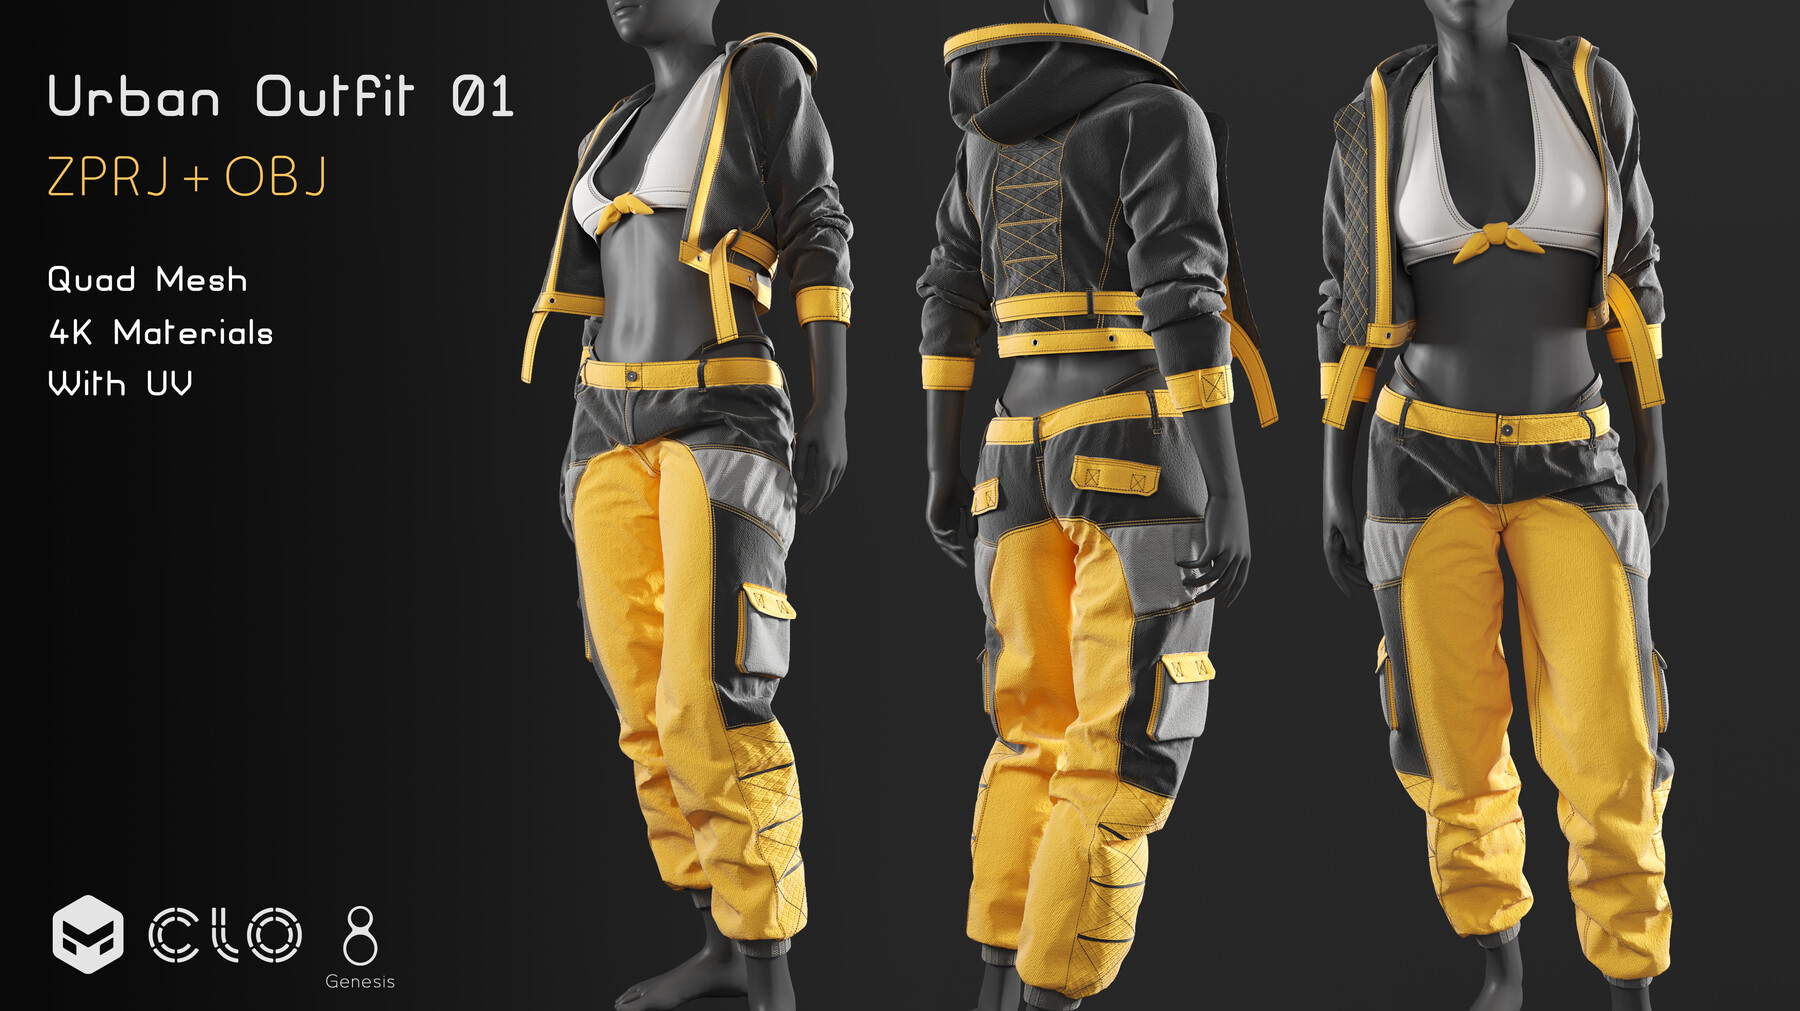 ArtStation - Urban Outfit - 01 | Game Assets